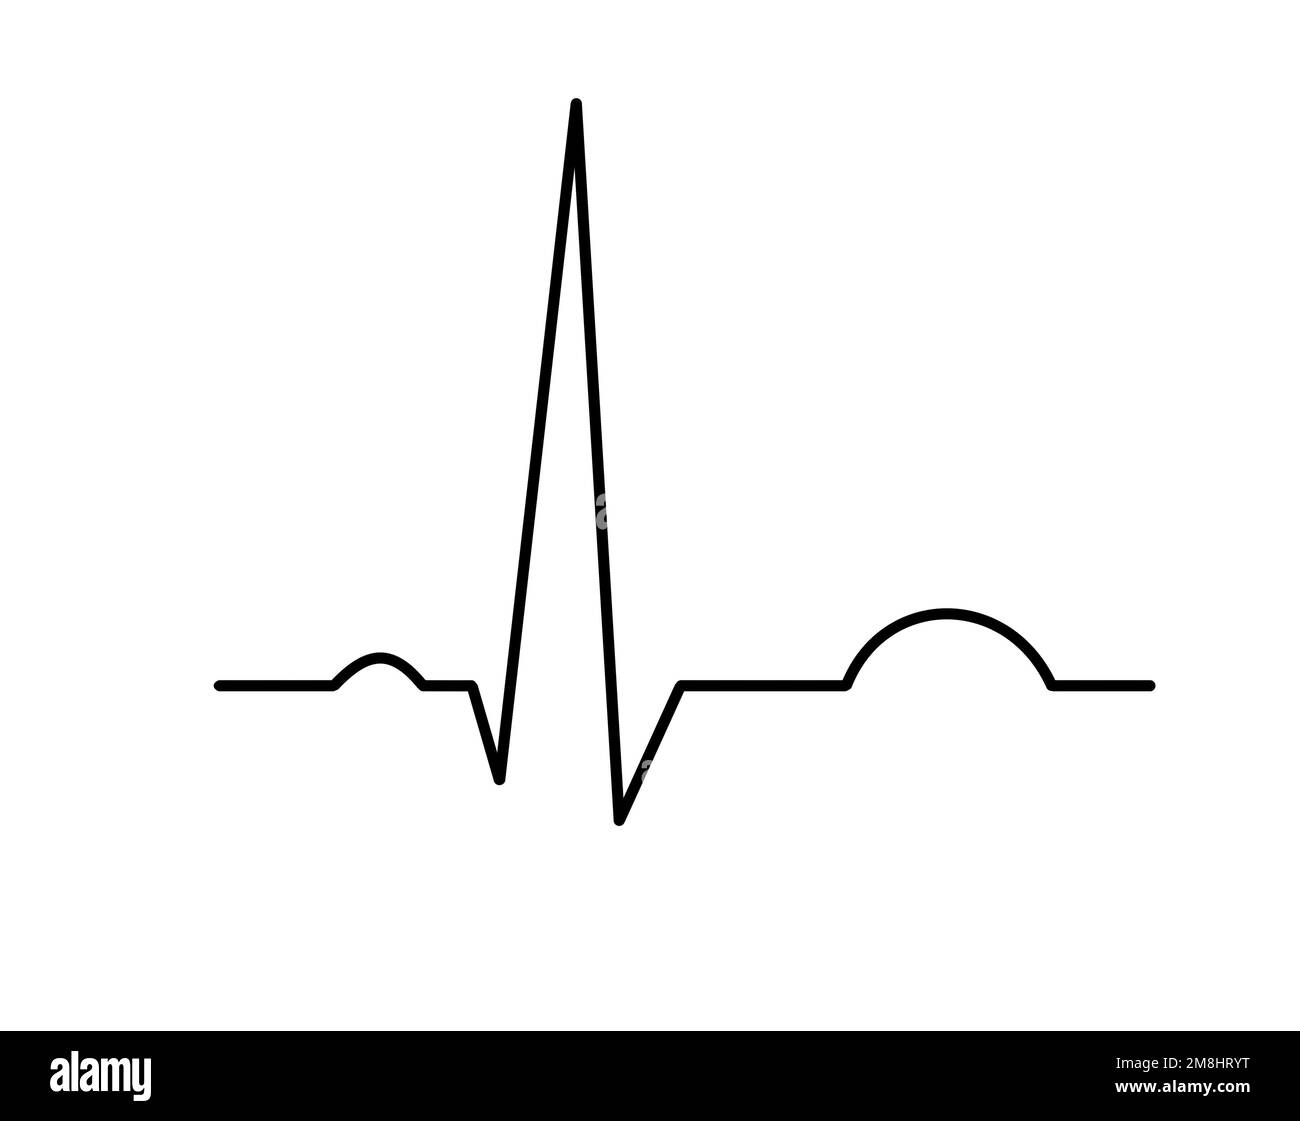 Heartbeat black line, ECG or EKG Cardio graph symbol for Healthy and Medical Analysis, transparent background Stock Photo